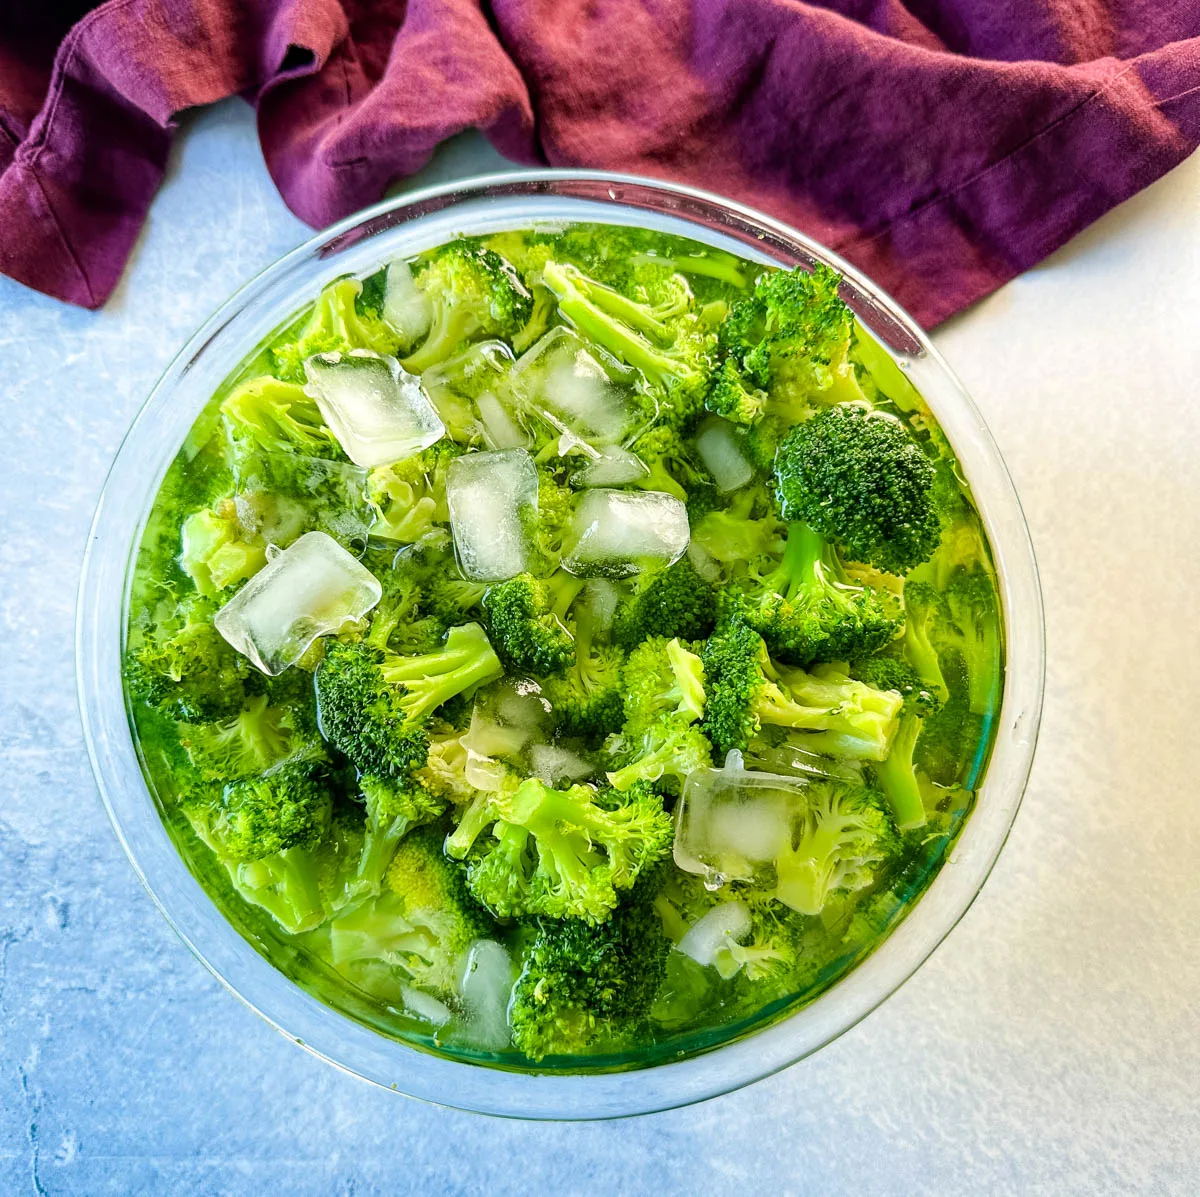 blanched broccoli in a glass bowl with ice